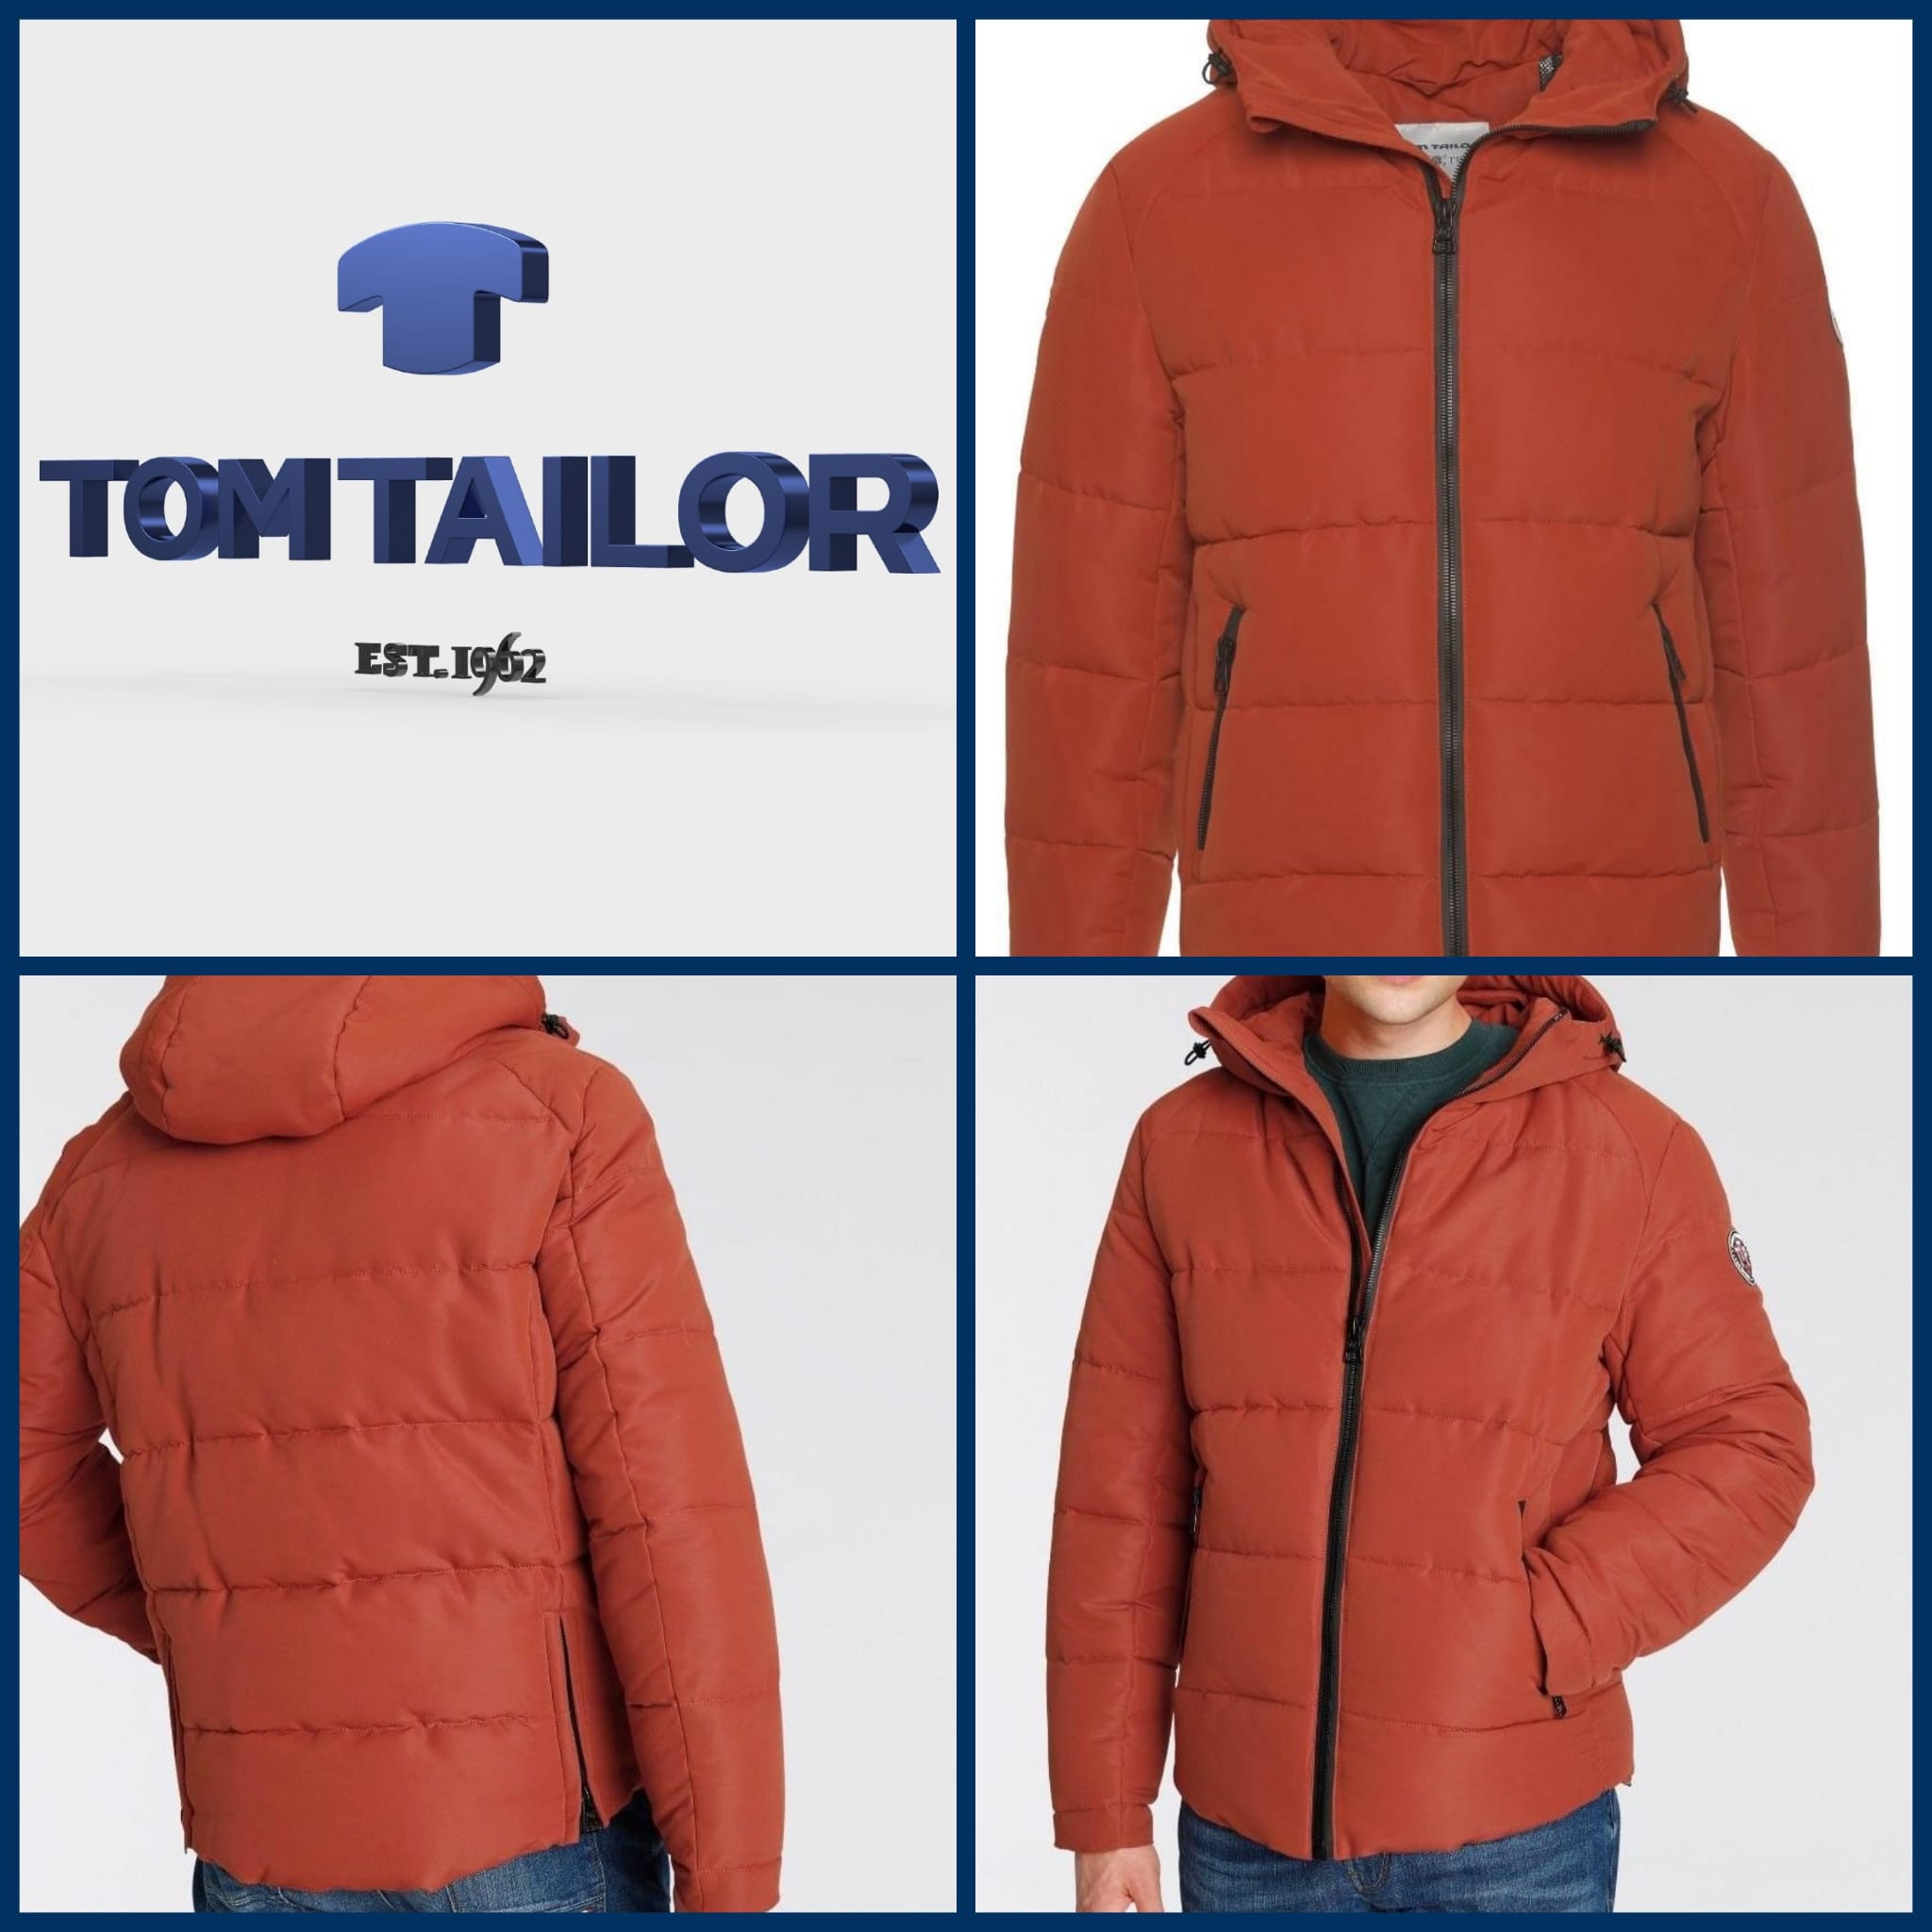 Men's jackets from Tom Tailor XL+